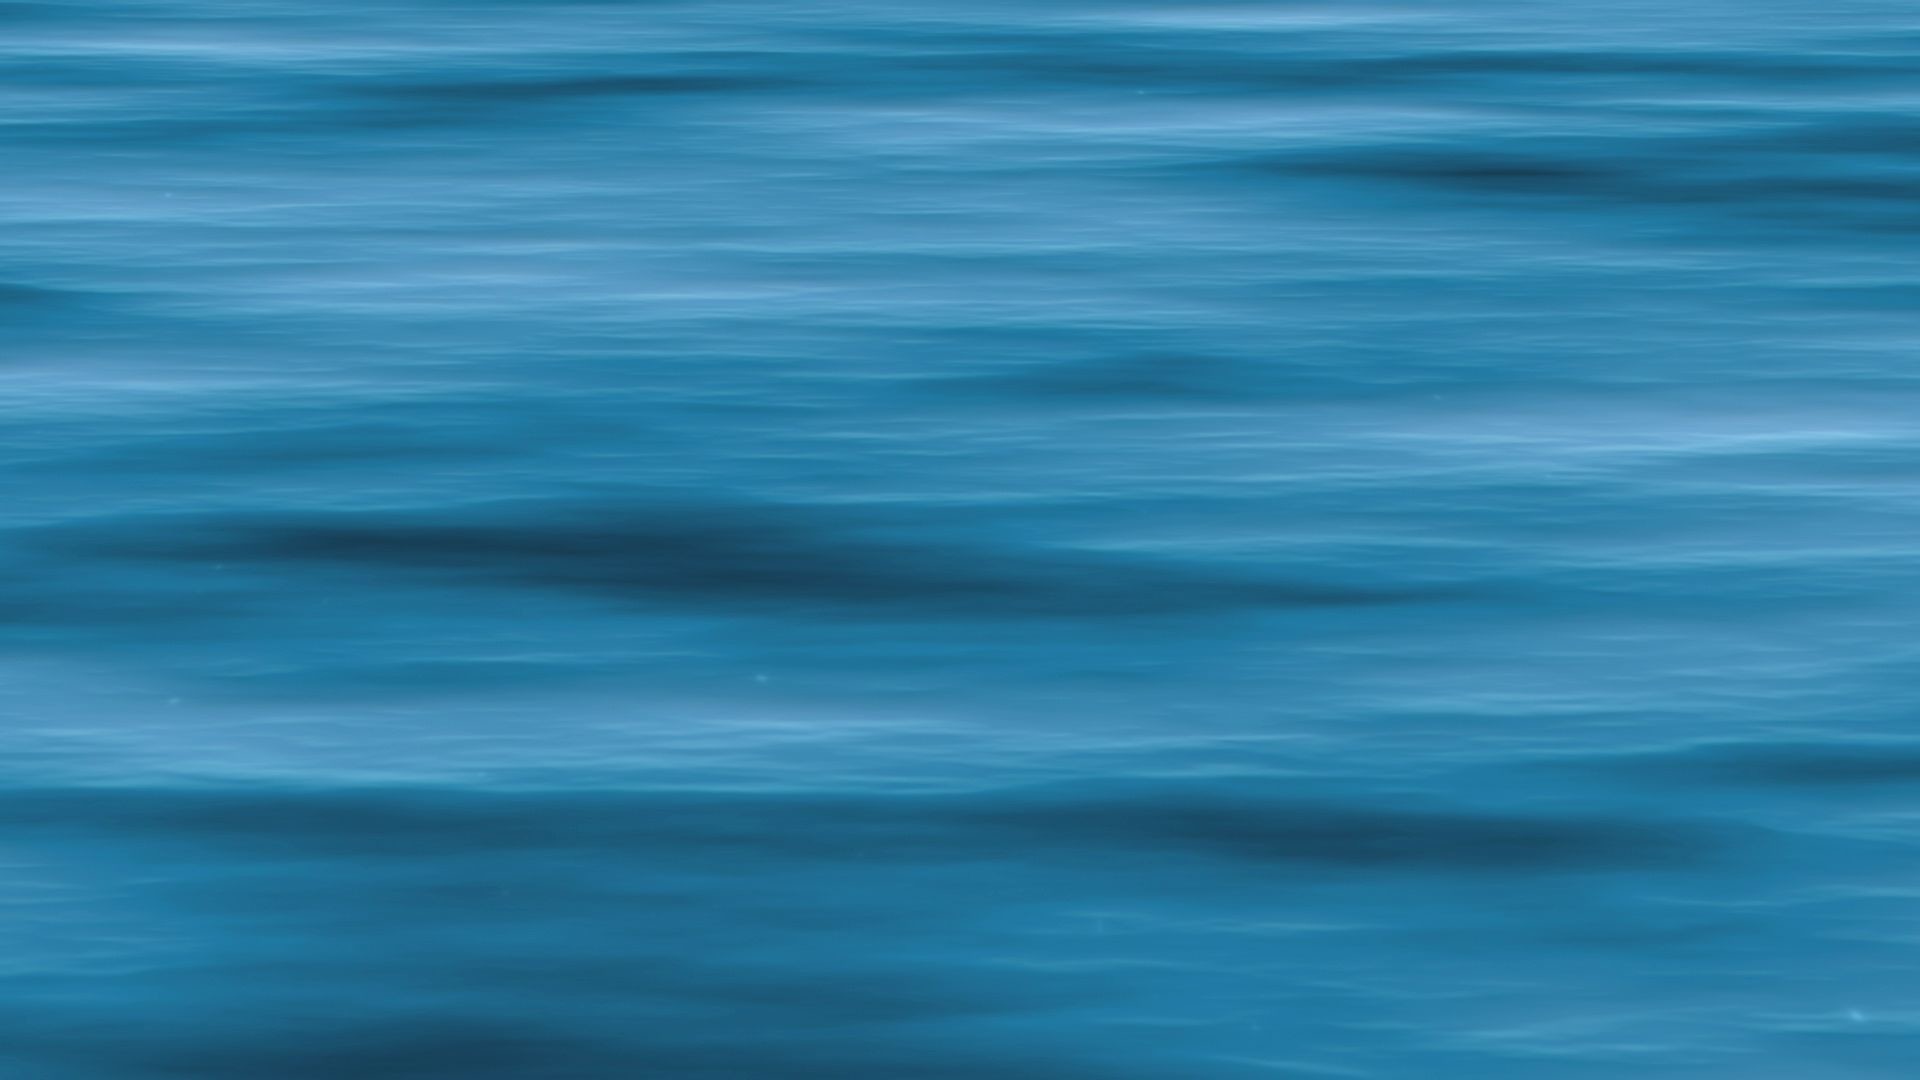 1920x1080 'Calm Water 1' - Abstract Sea Waves Motion Background Loop_Sample2